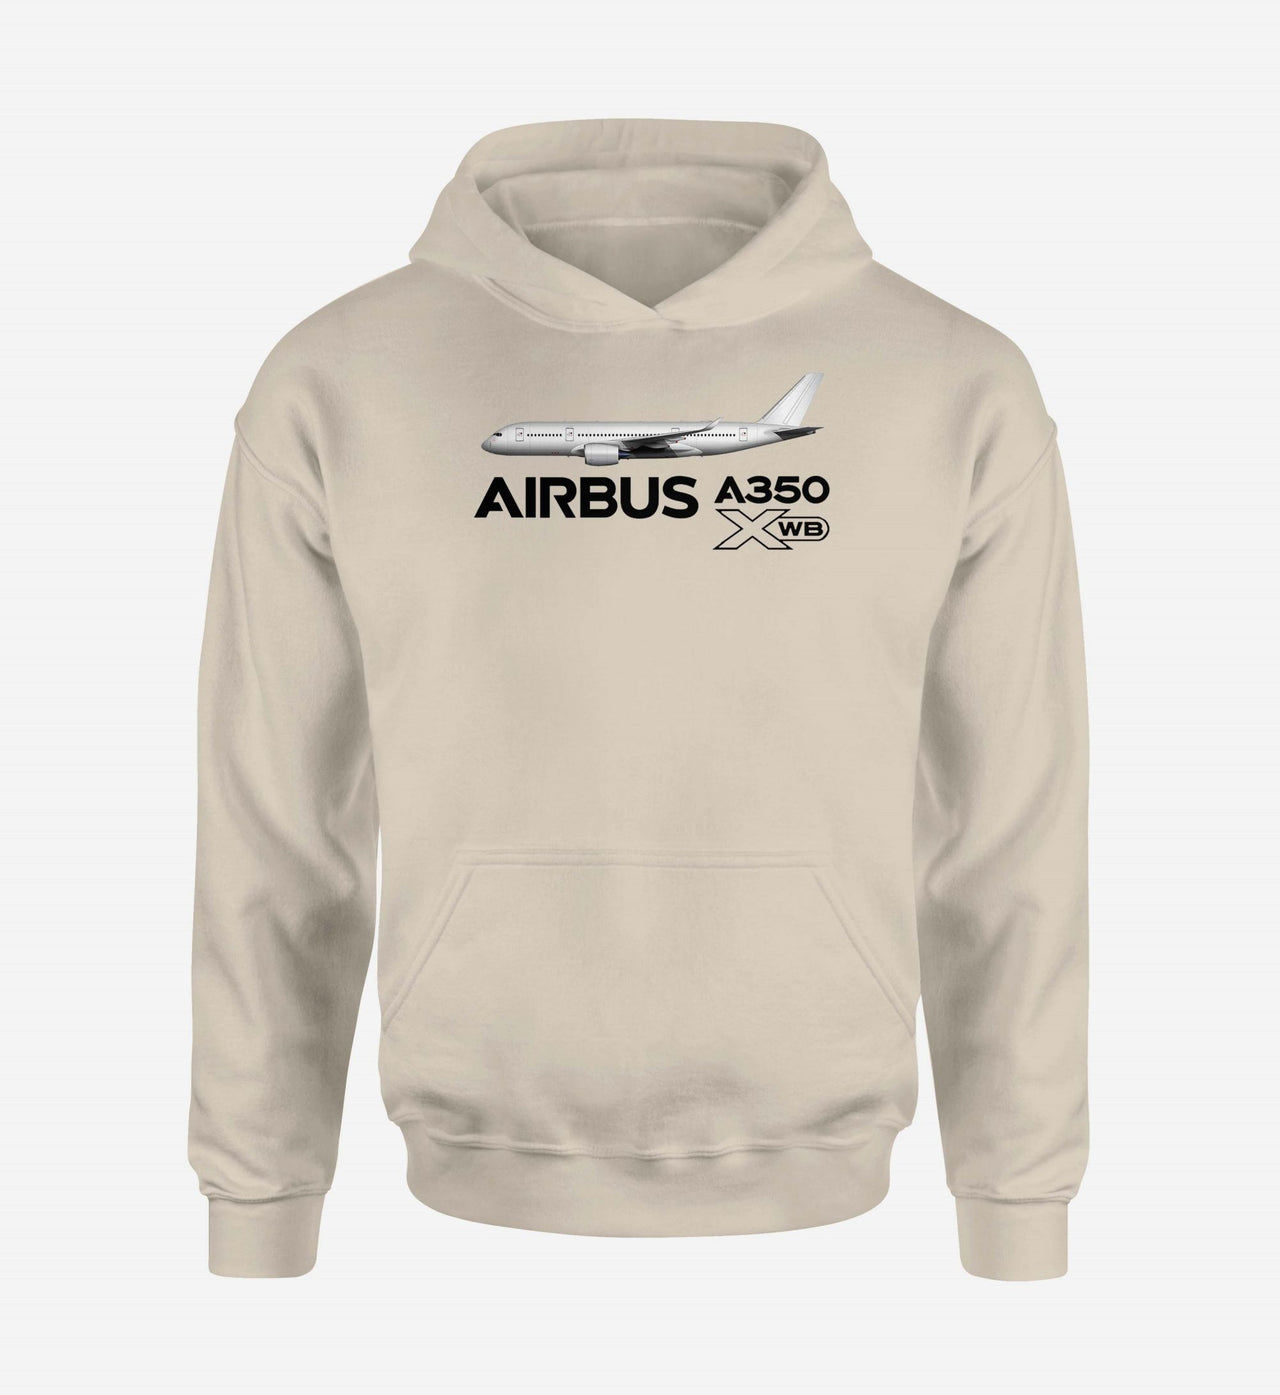 The Airbus A350 WXB Designed Hoodies